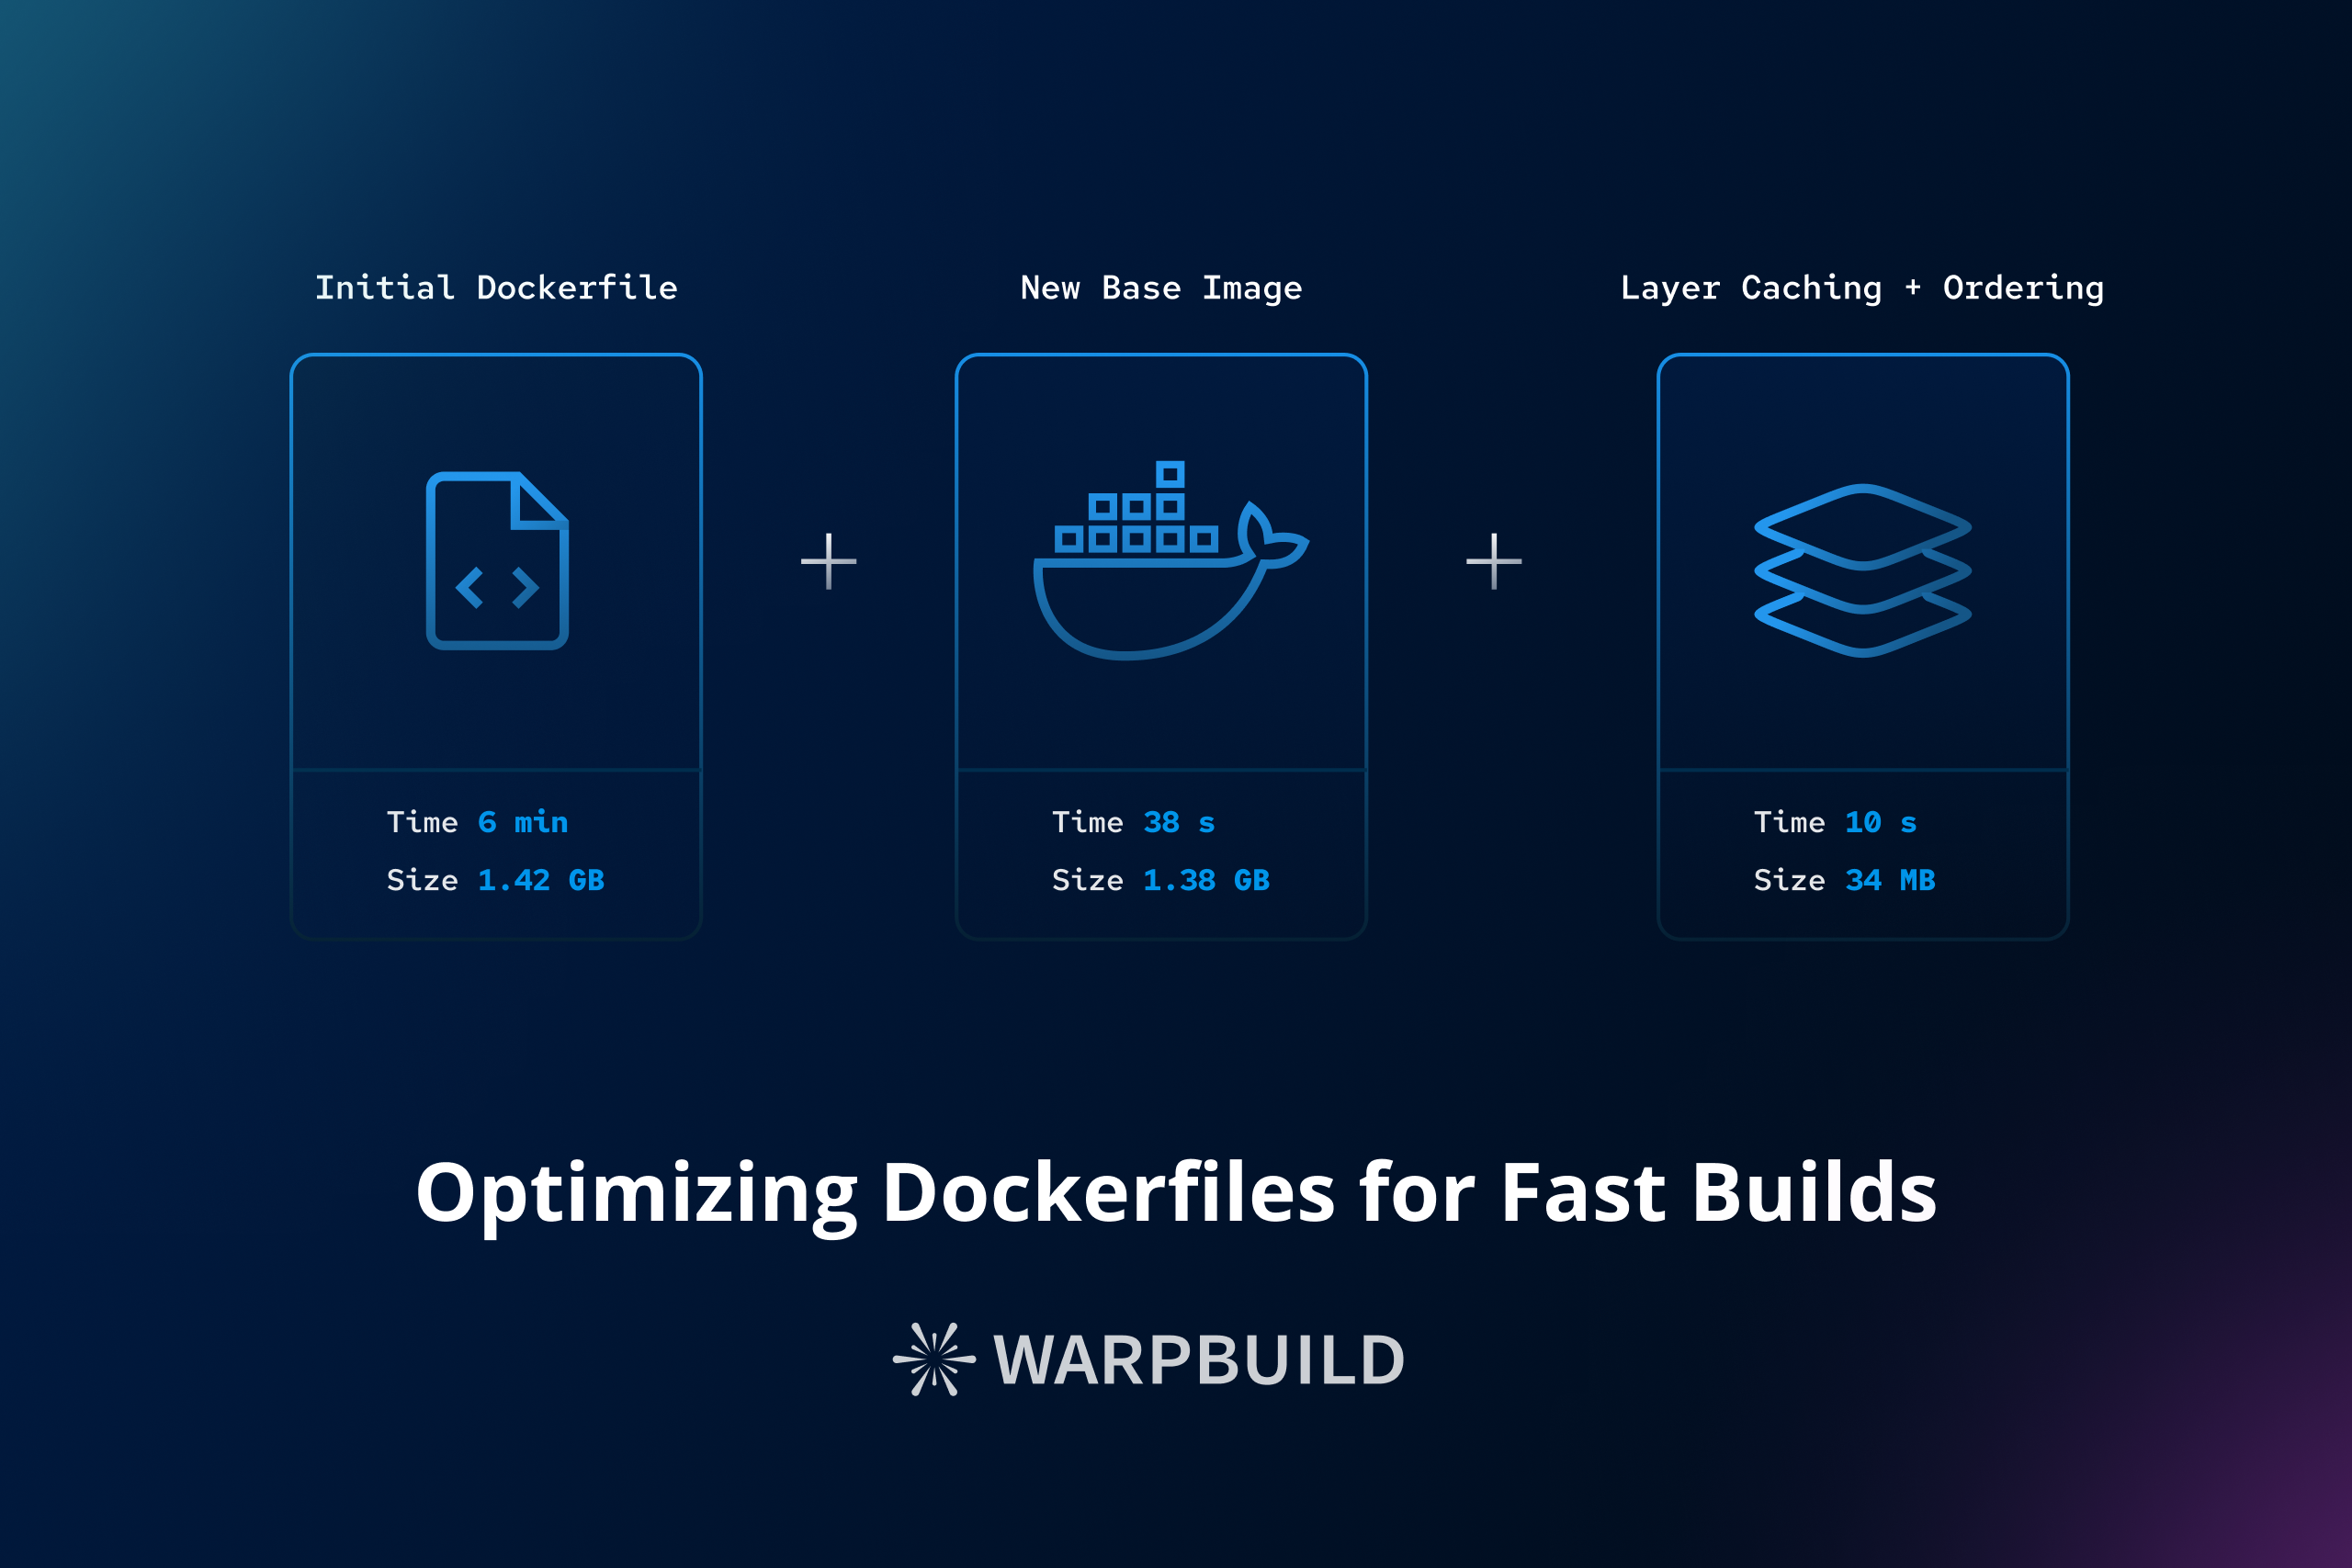 Optimizing Dockerfiles for Fast Builds